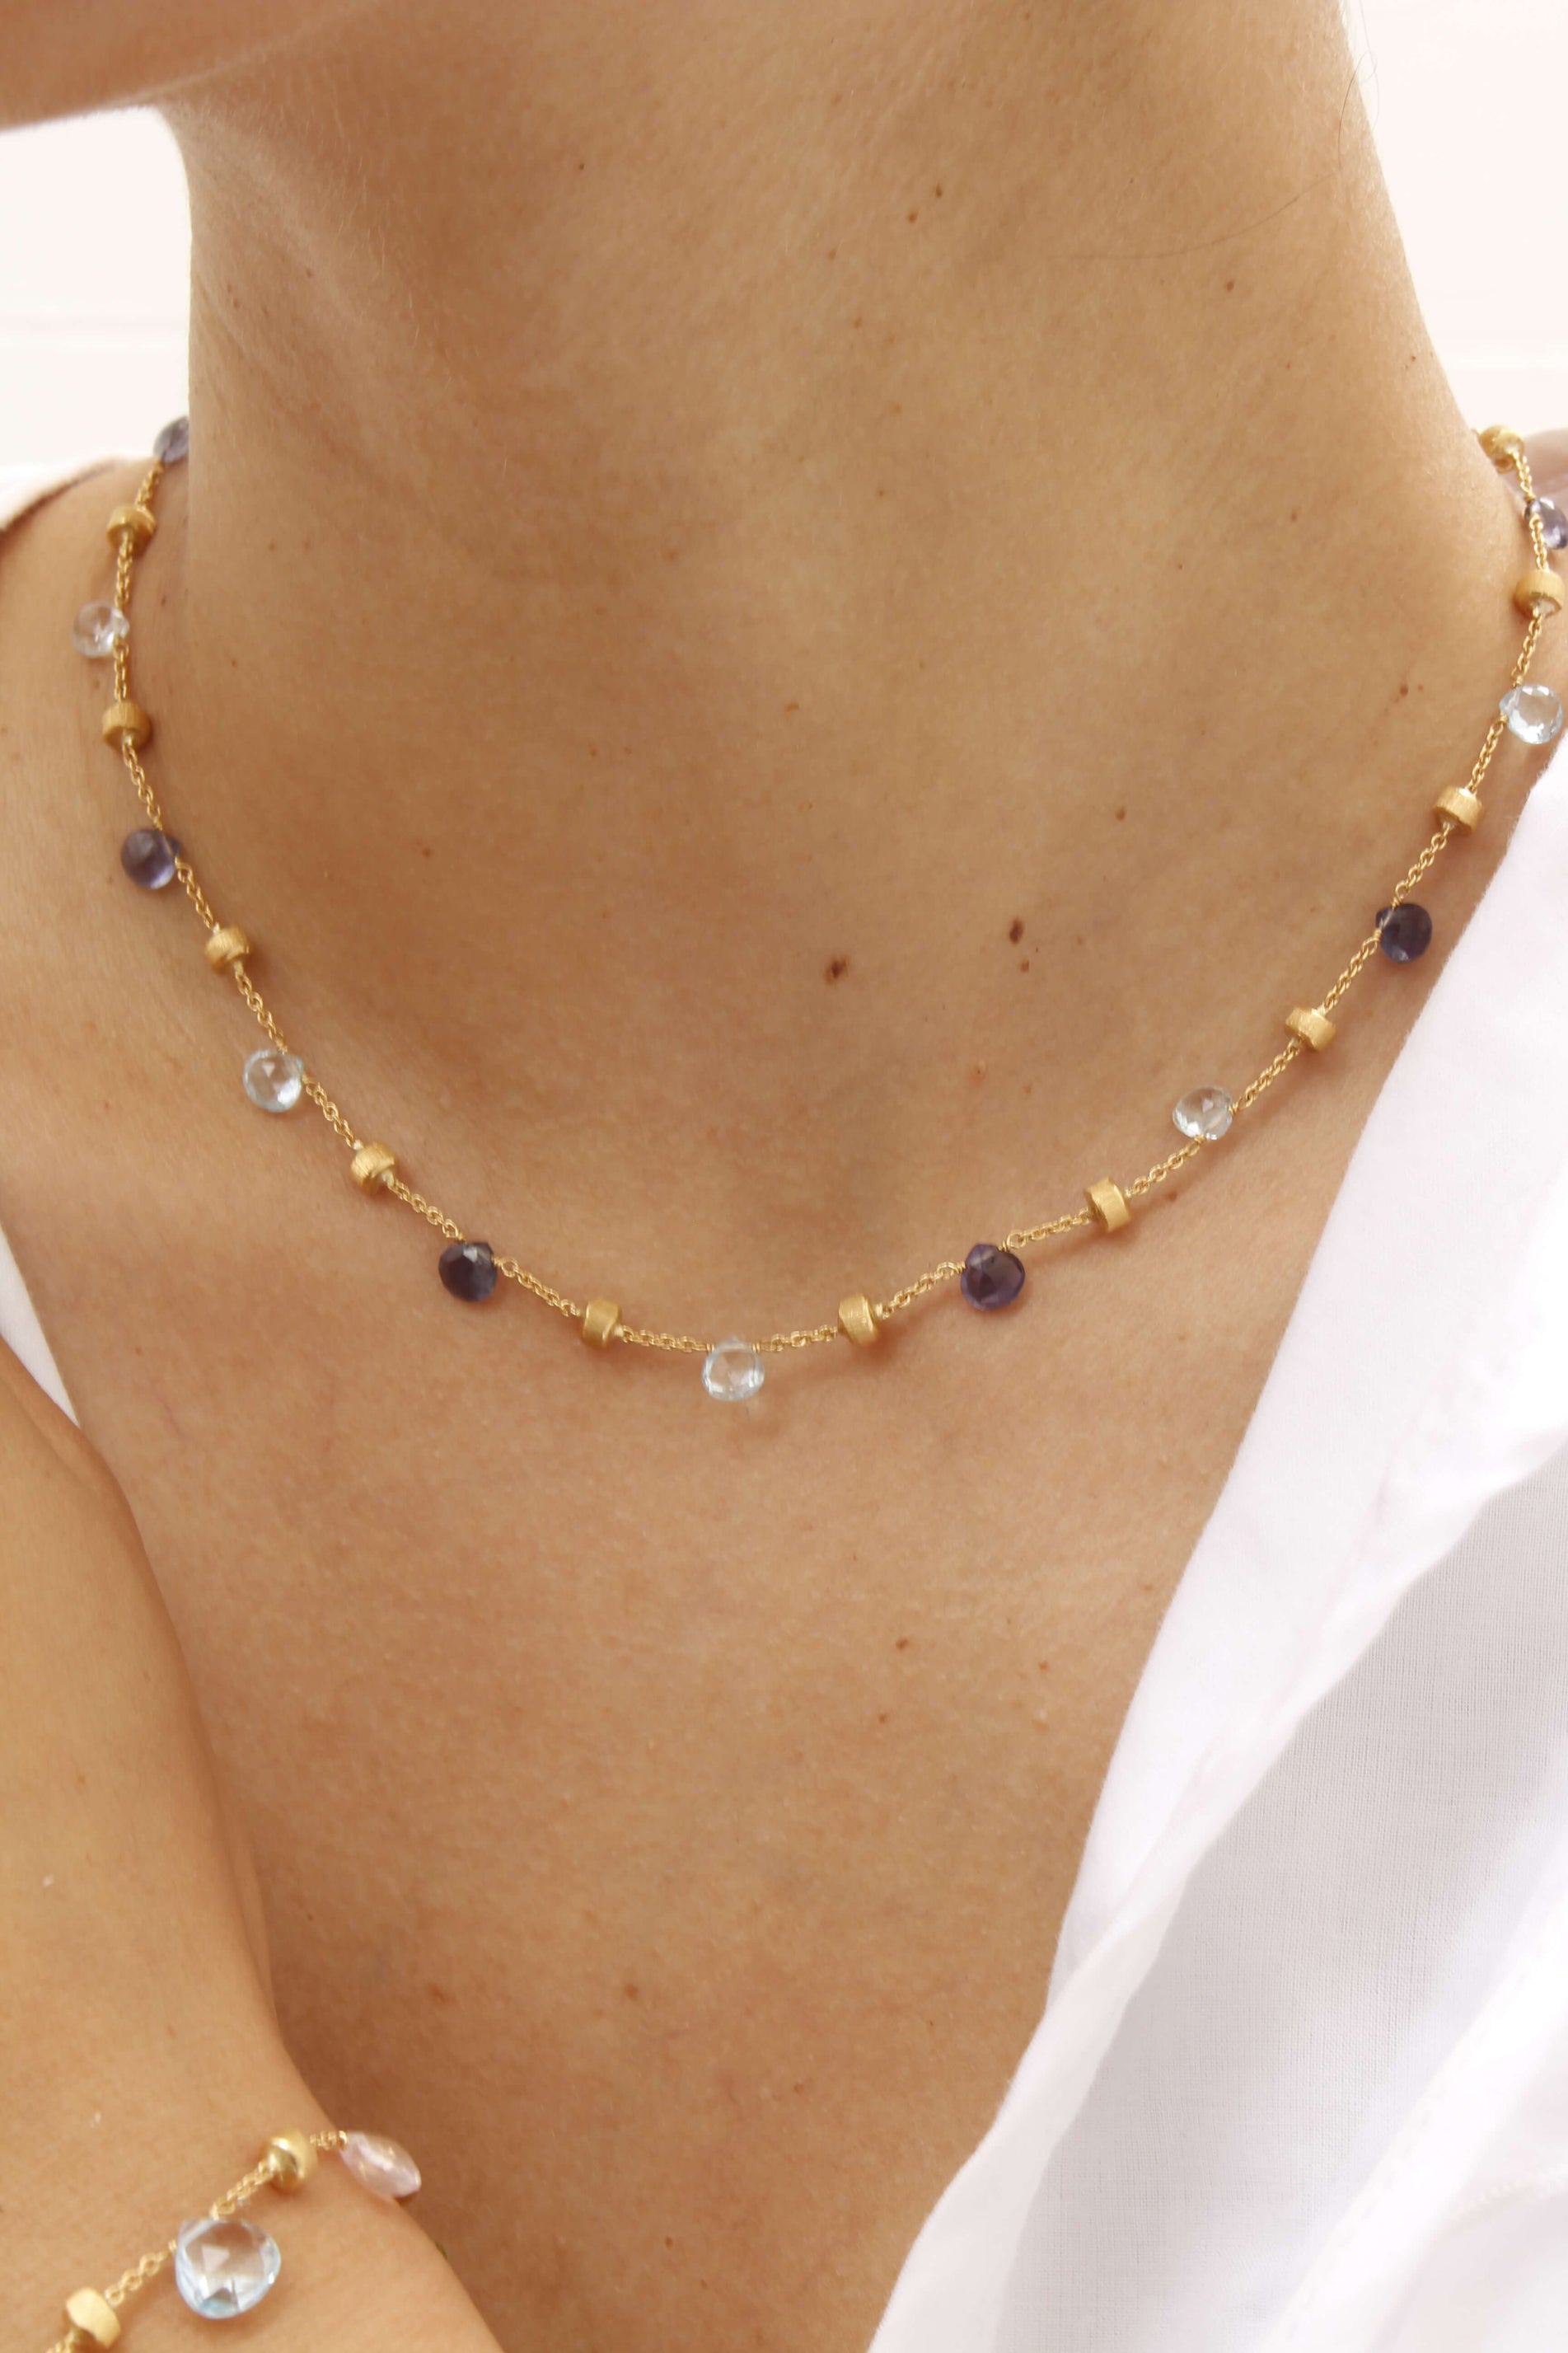 Paradise Necklace in 18k Yellow Gold with Iolite and Sky Blue Topaz - Orsini Jewellers NZ